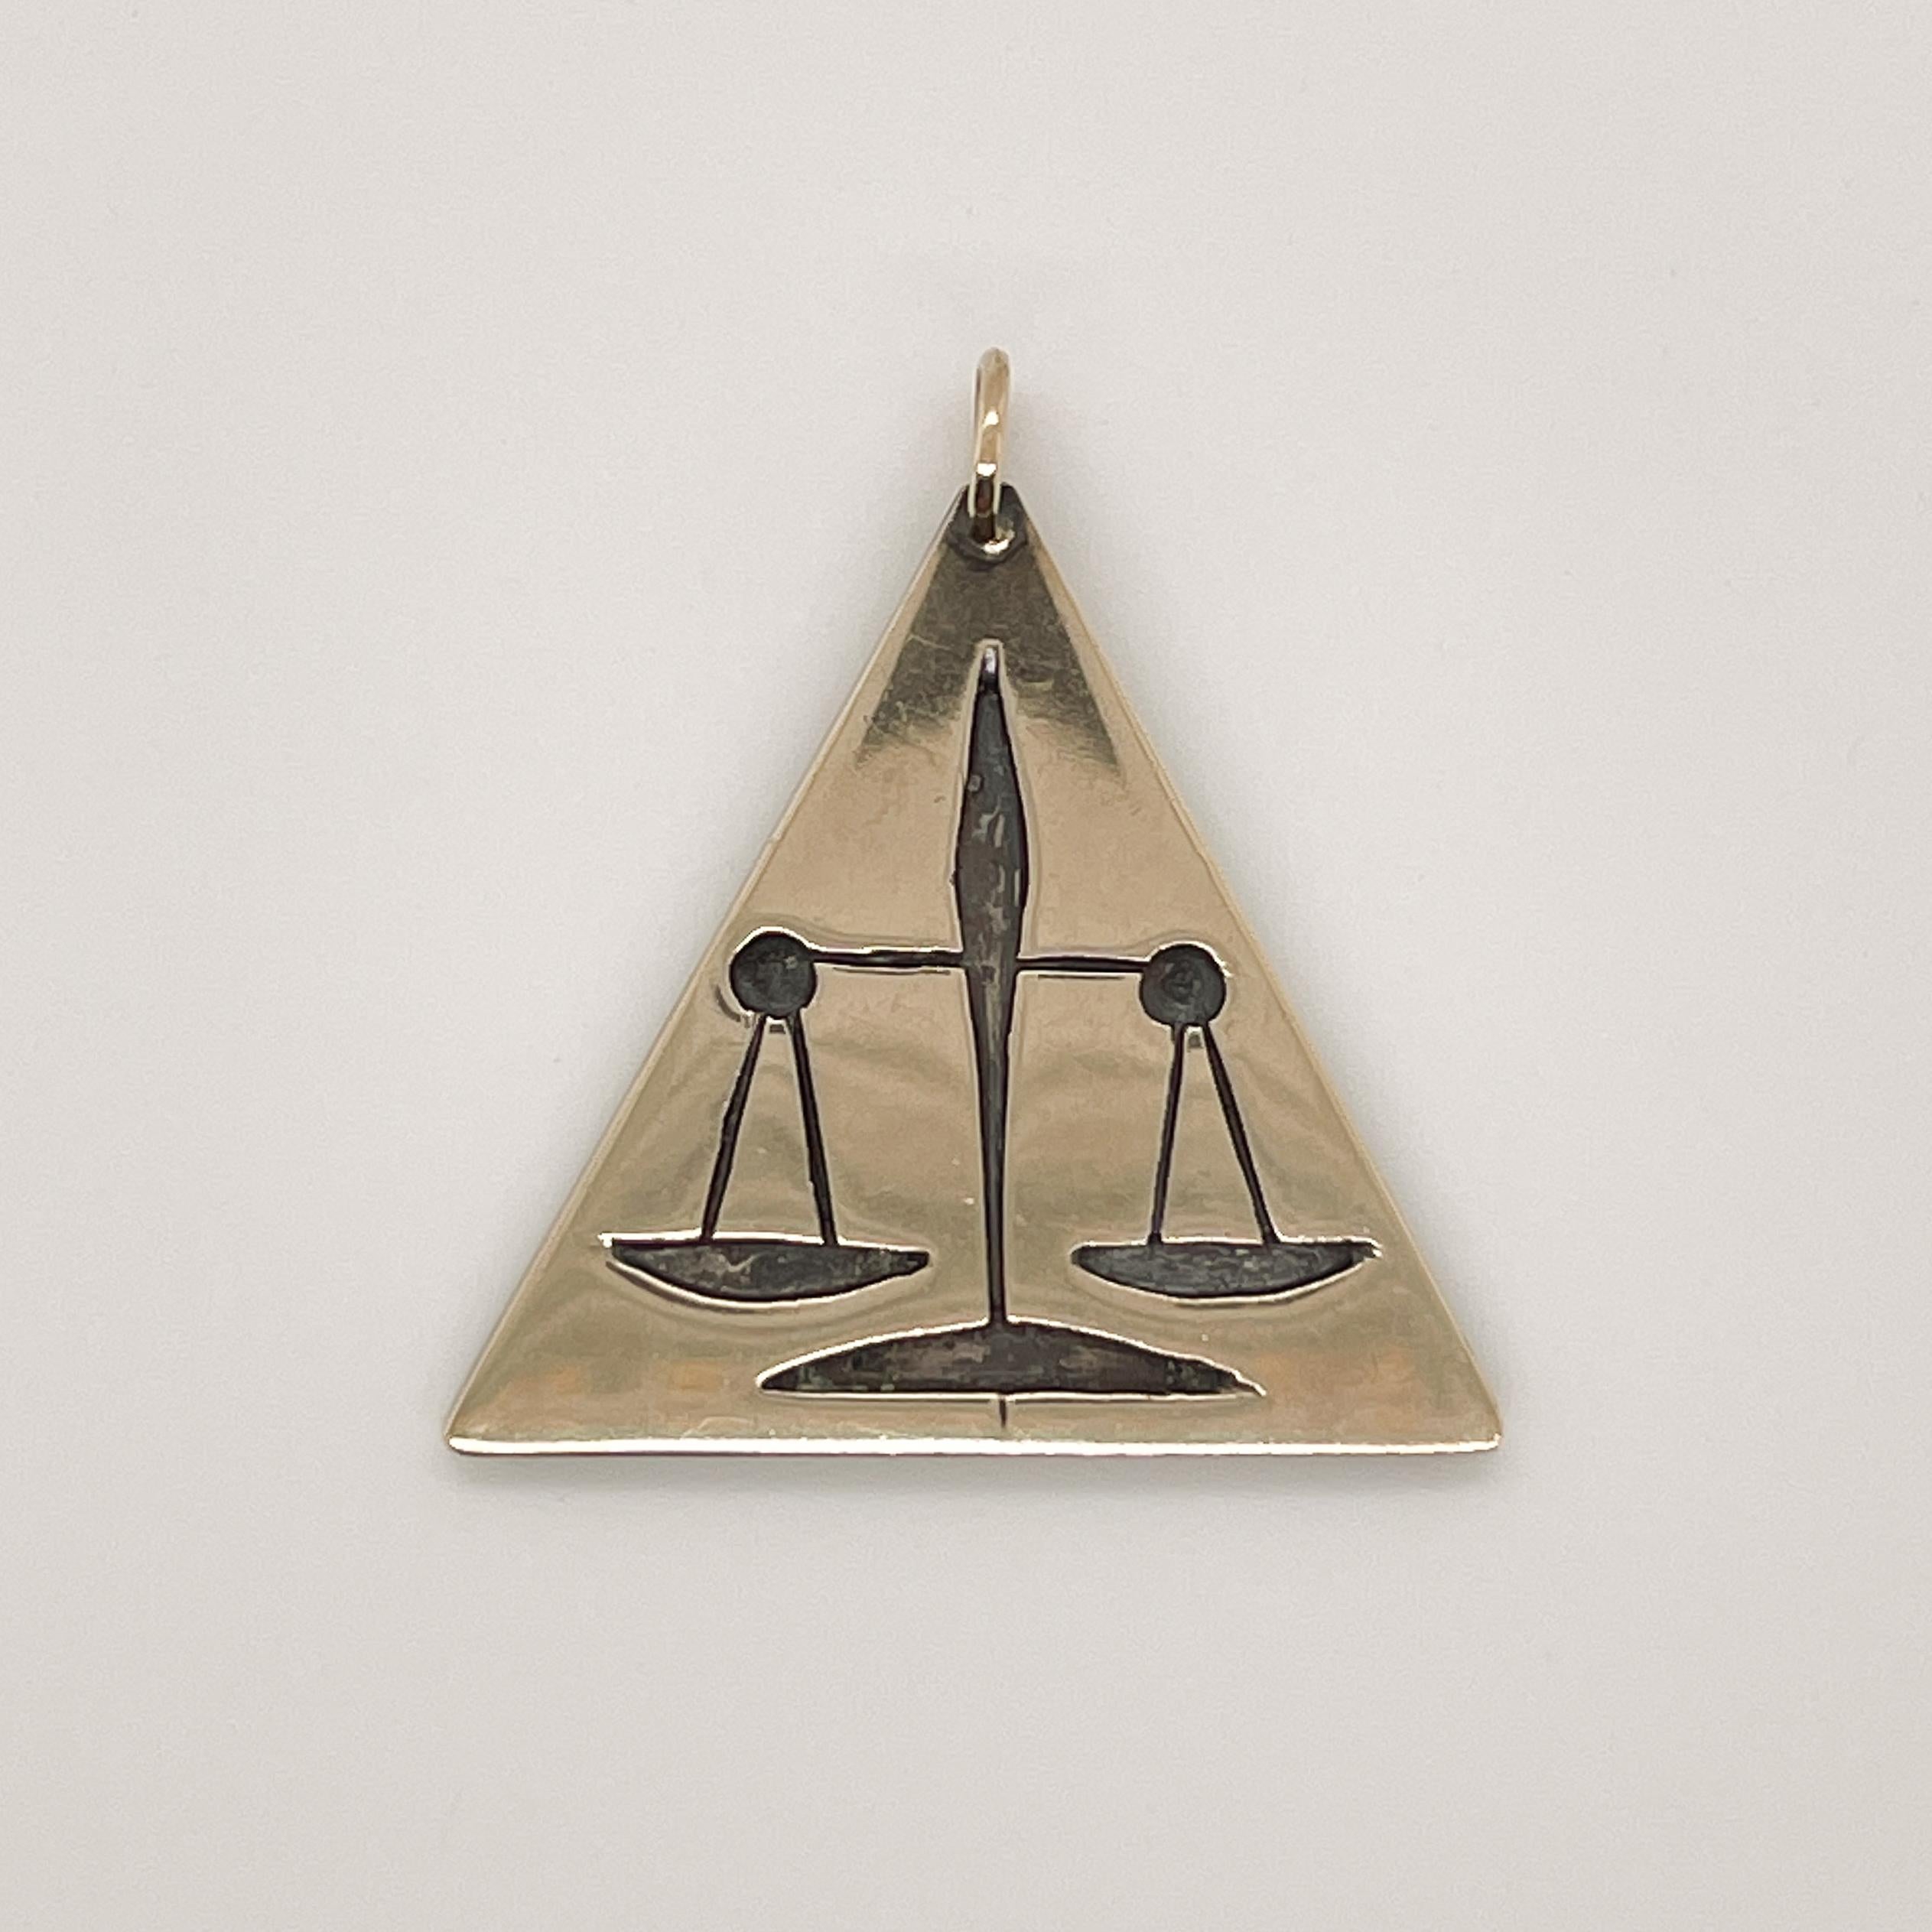 A fine pendant by Ed Wiener.

In a triangular shape.

Embossed with an equal-arm balance -- perhaps representing the Scales of Justice.

Great design from the renowned New York modernist jewelry maker!

Date:
Mid-20th Century

Overall Condition:
It